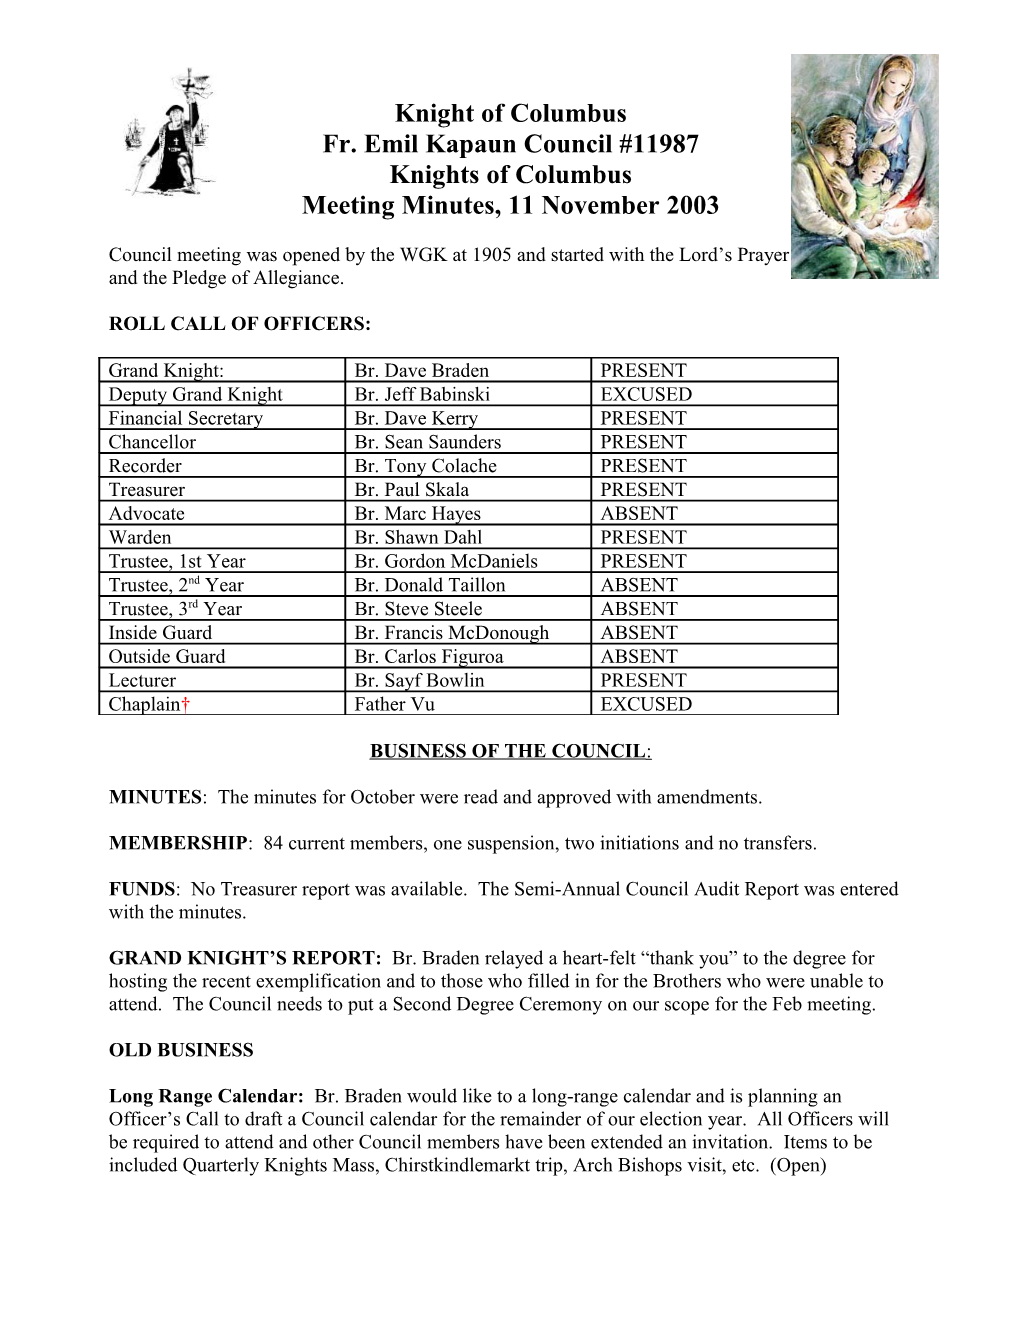 Knights of Columbus Meeting Minutes